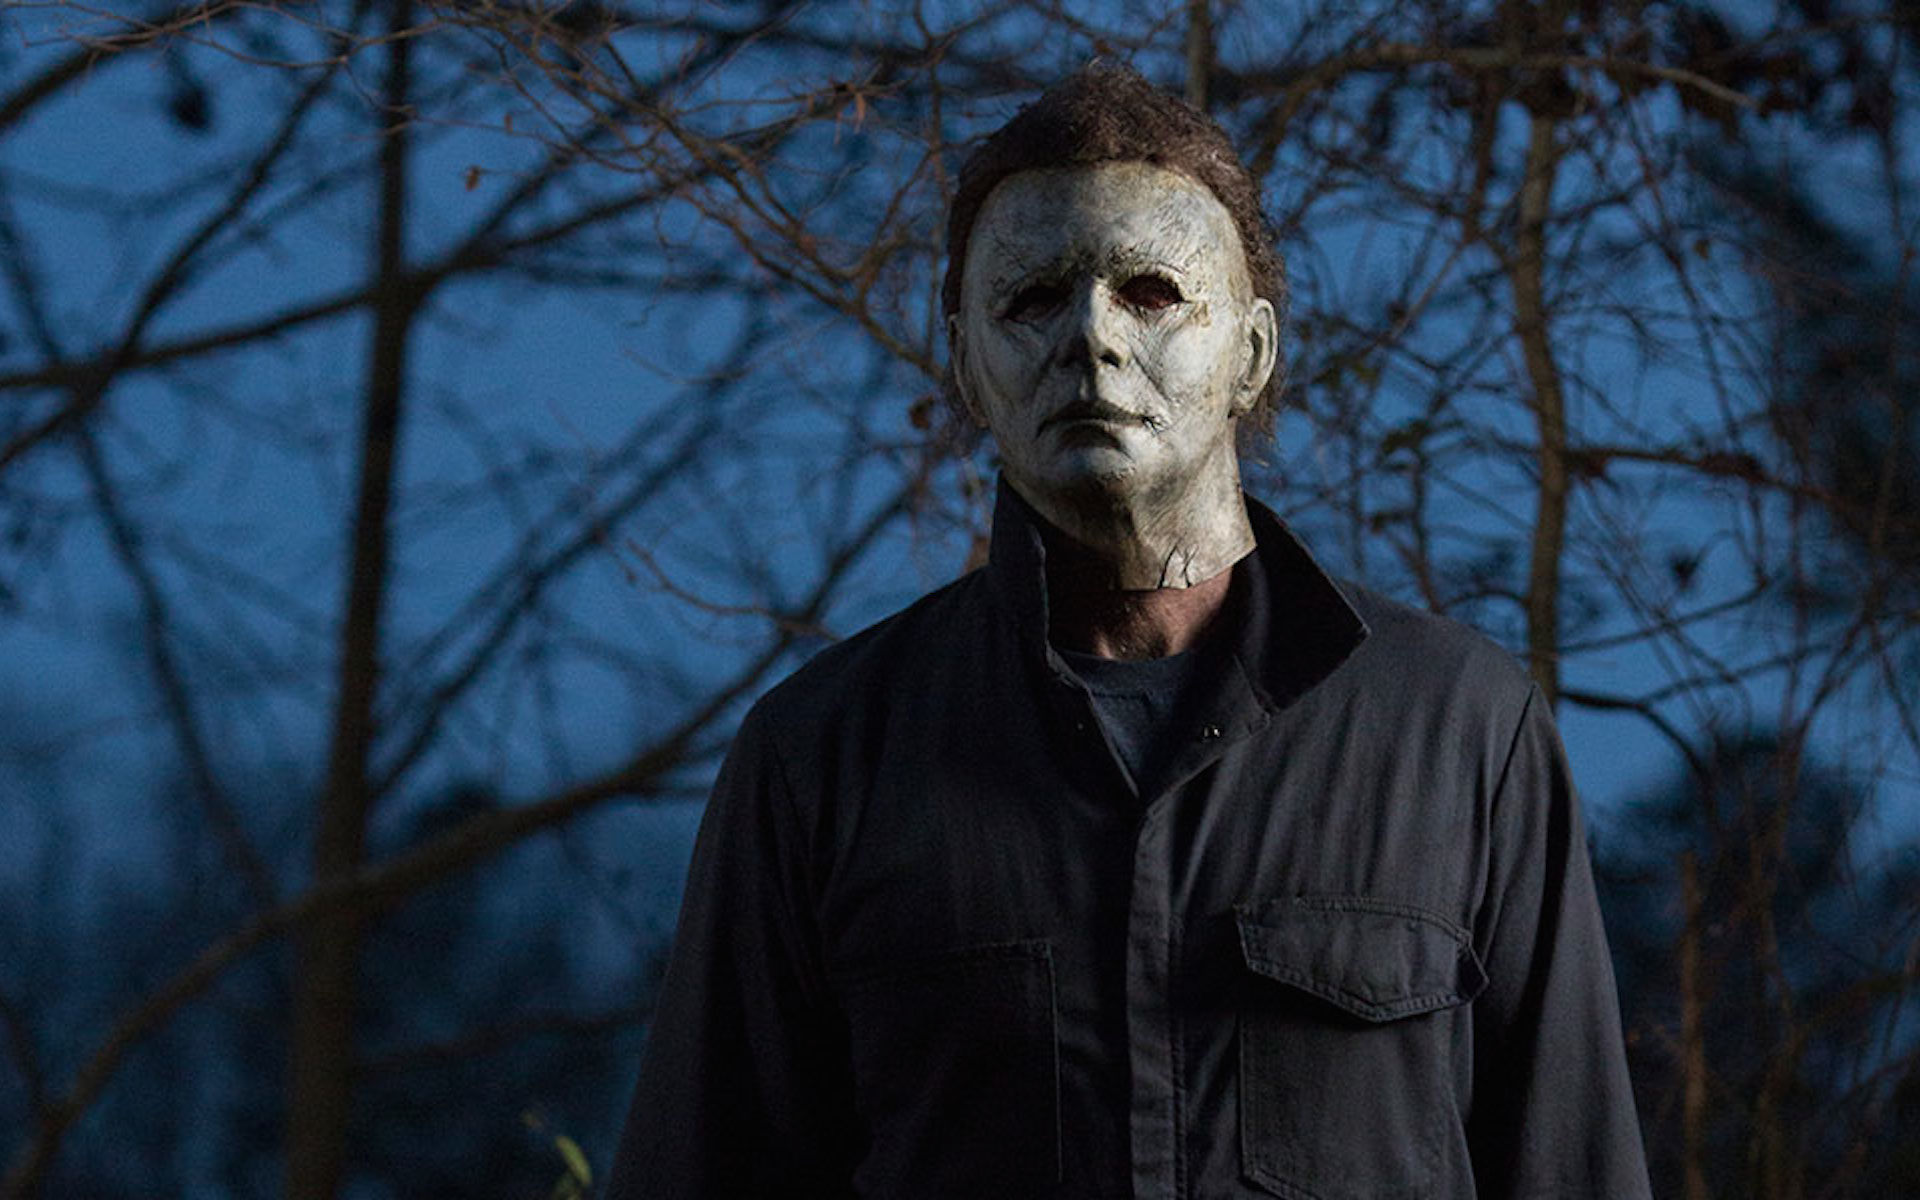 TIFF Review ‘Halloween’ gives Michael Myers the sequel he’s deserved